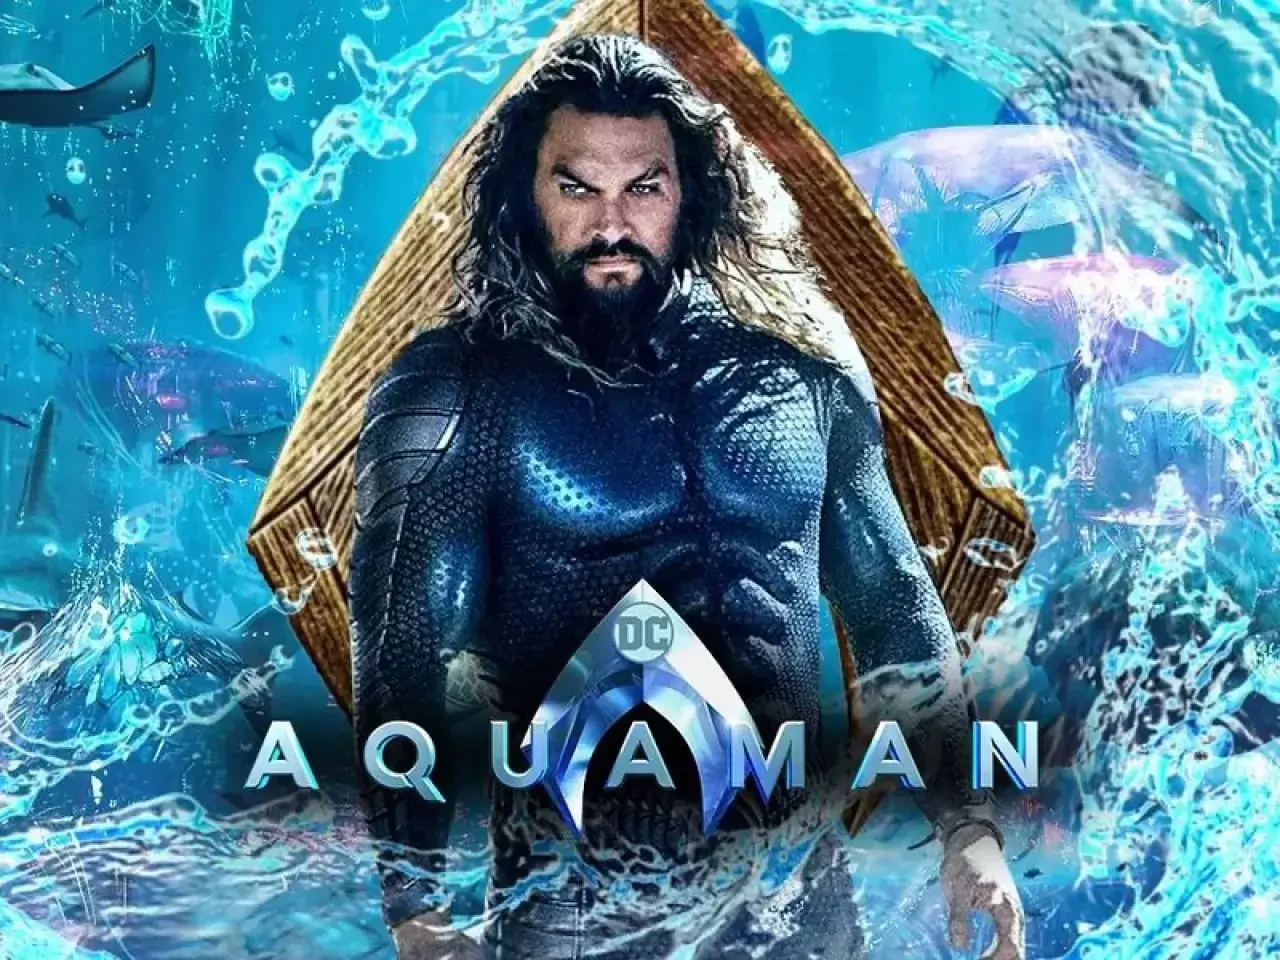 Aquaman 2 will be on screens on December 20